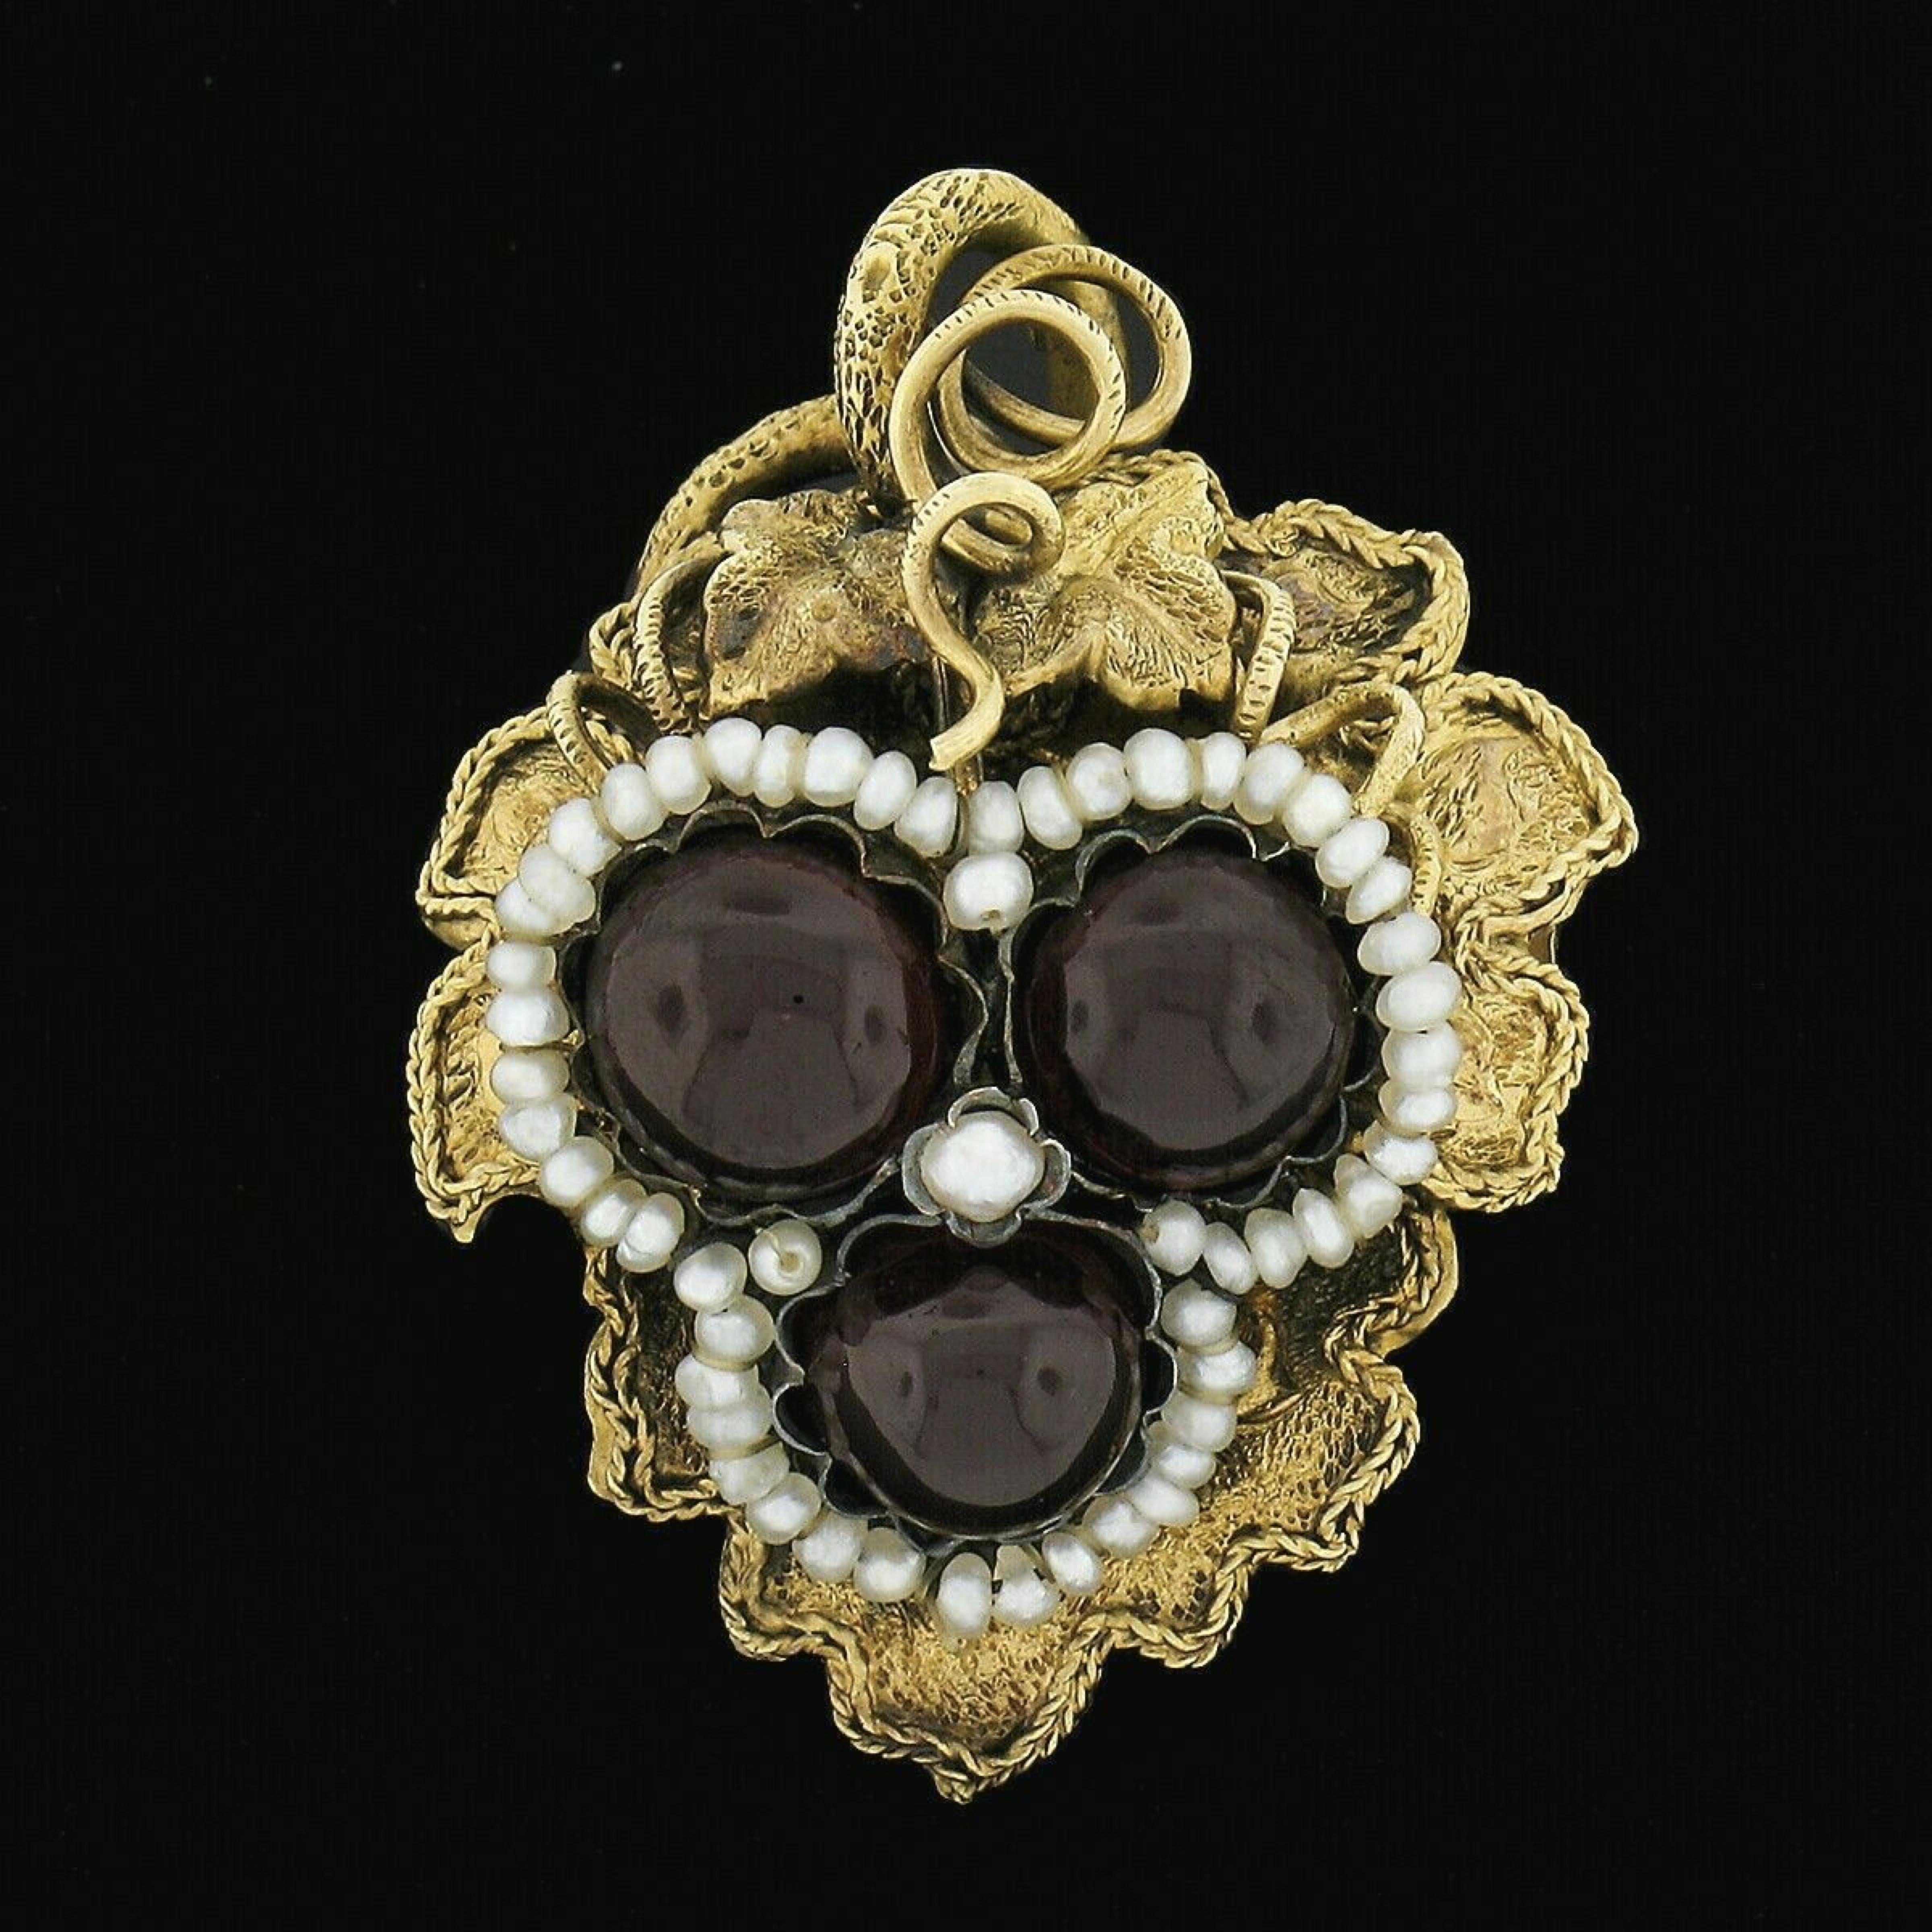 This elegant antique brooch or pendant is crafted in solid 14k yellow gold and features a beautifully detailed 3D foliage design set with a cluster of fine garnets and seed pearls at its center. The three natural garnets are round cabochon cut and